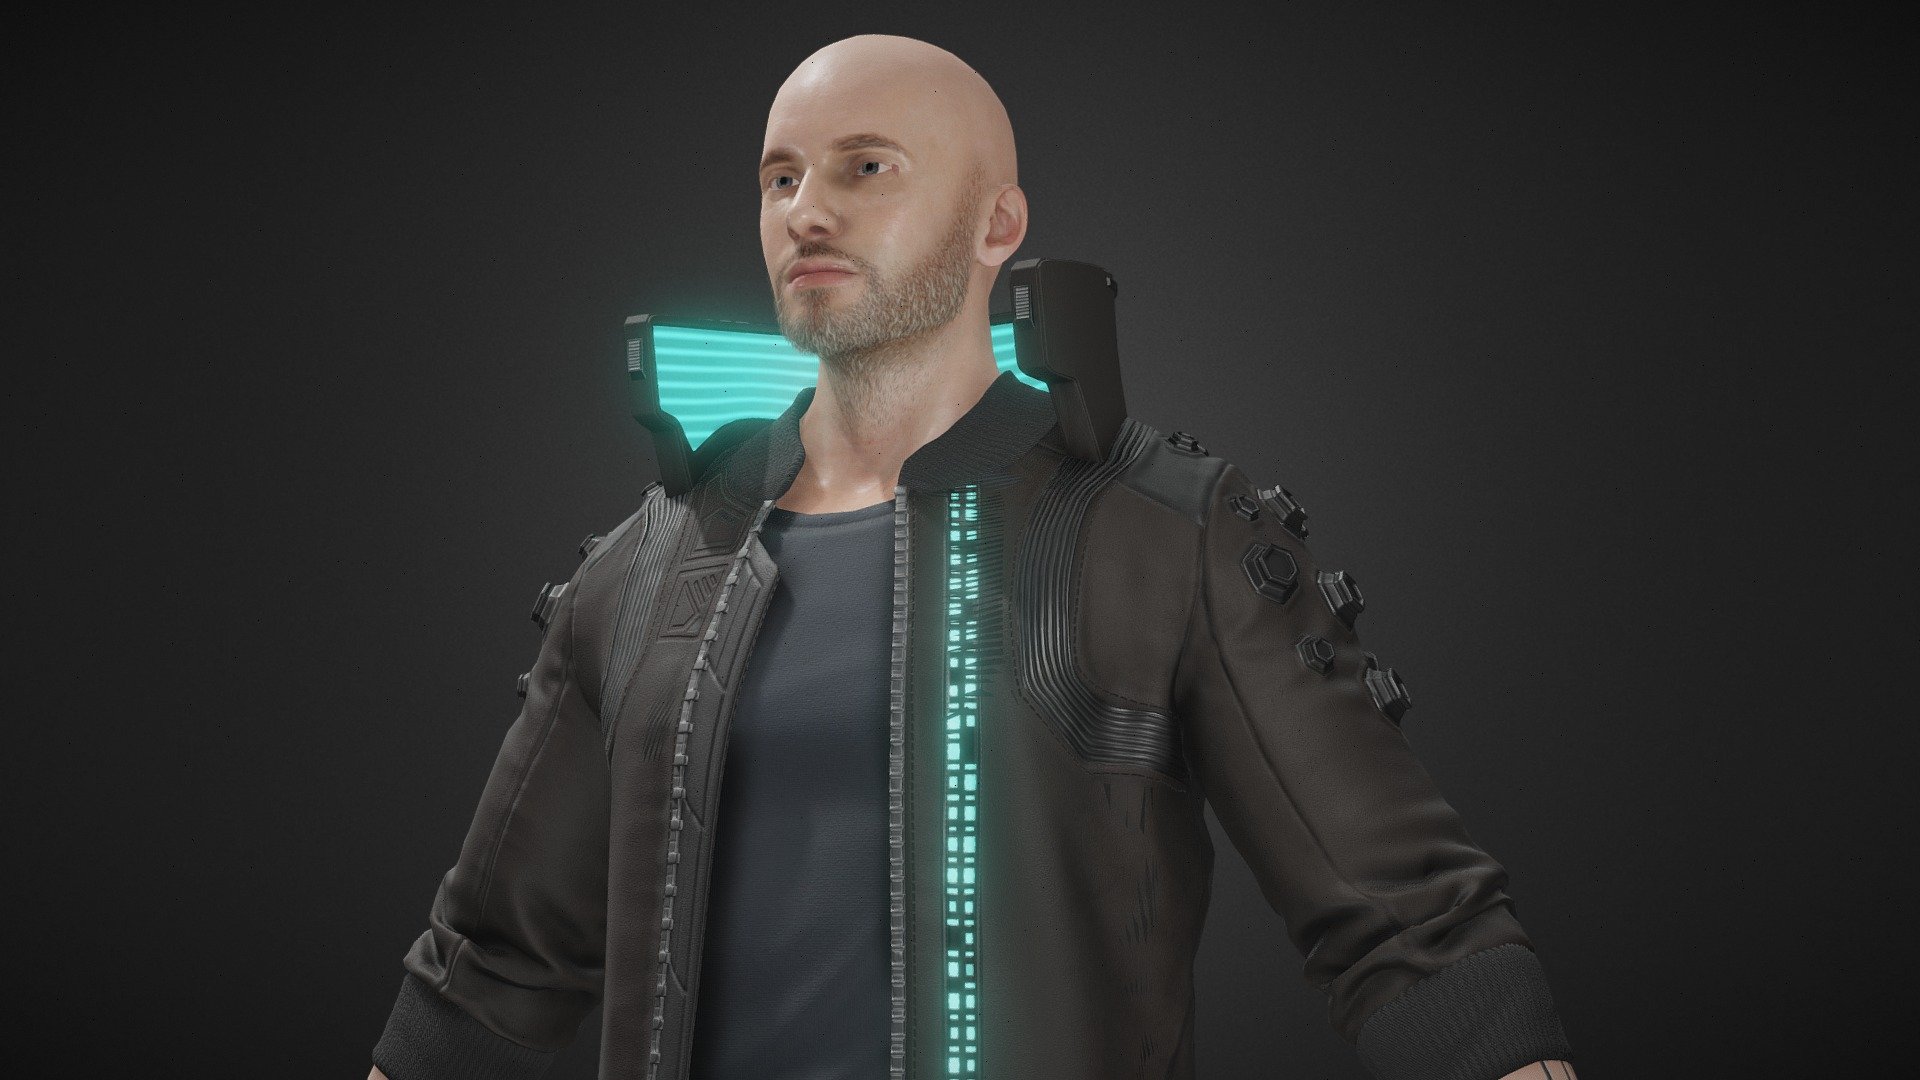 Cyberpunk character model. 113k tris 4k textures. Model include all what you need: separate textures for eyes/hair/teeth/tongue/jacket/pants/acessories/face.

You can use it for any your project (game, movie, envir, etc) 3d model